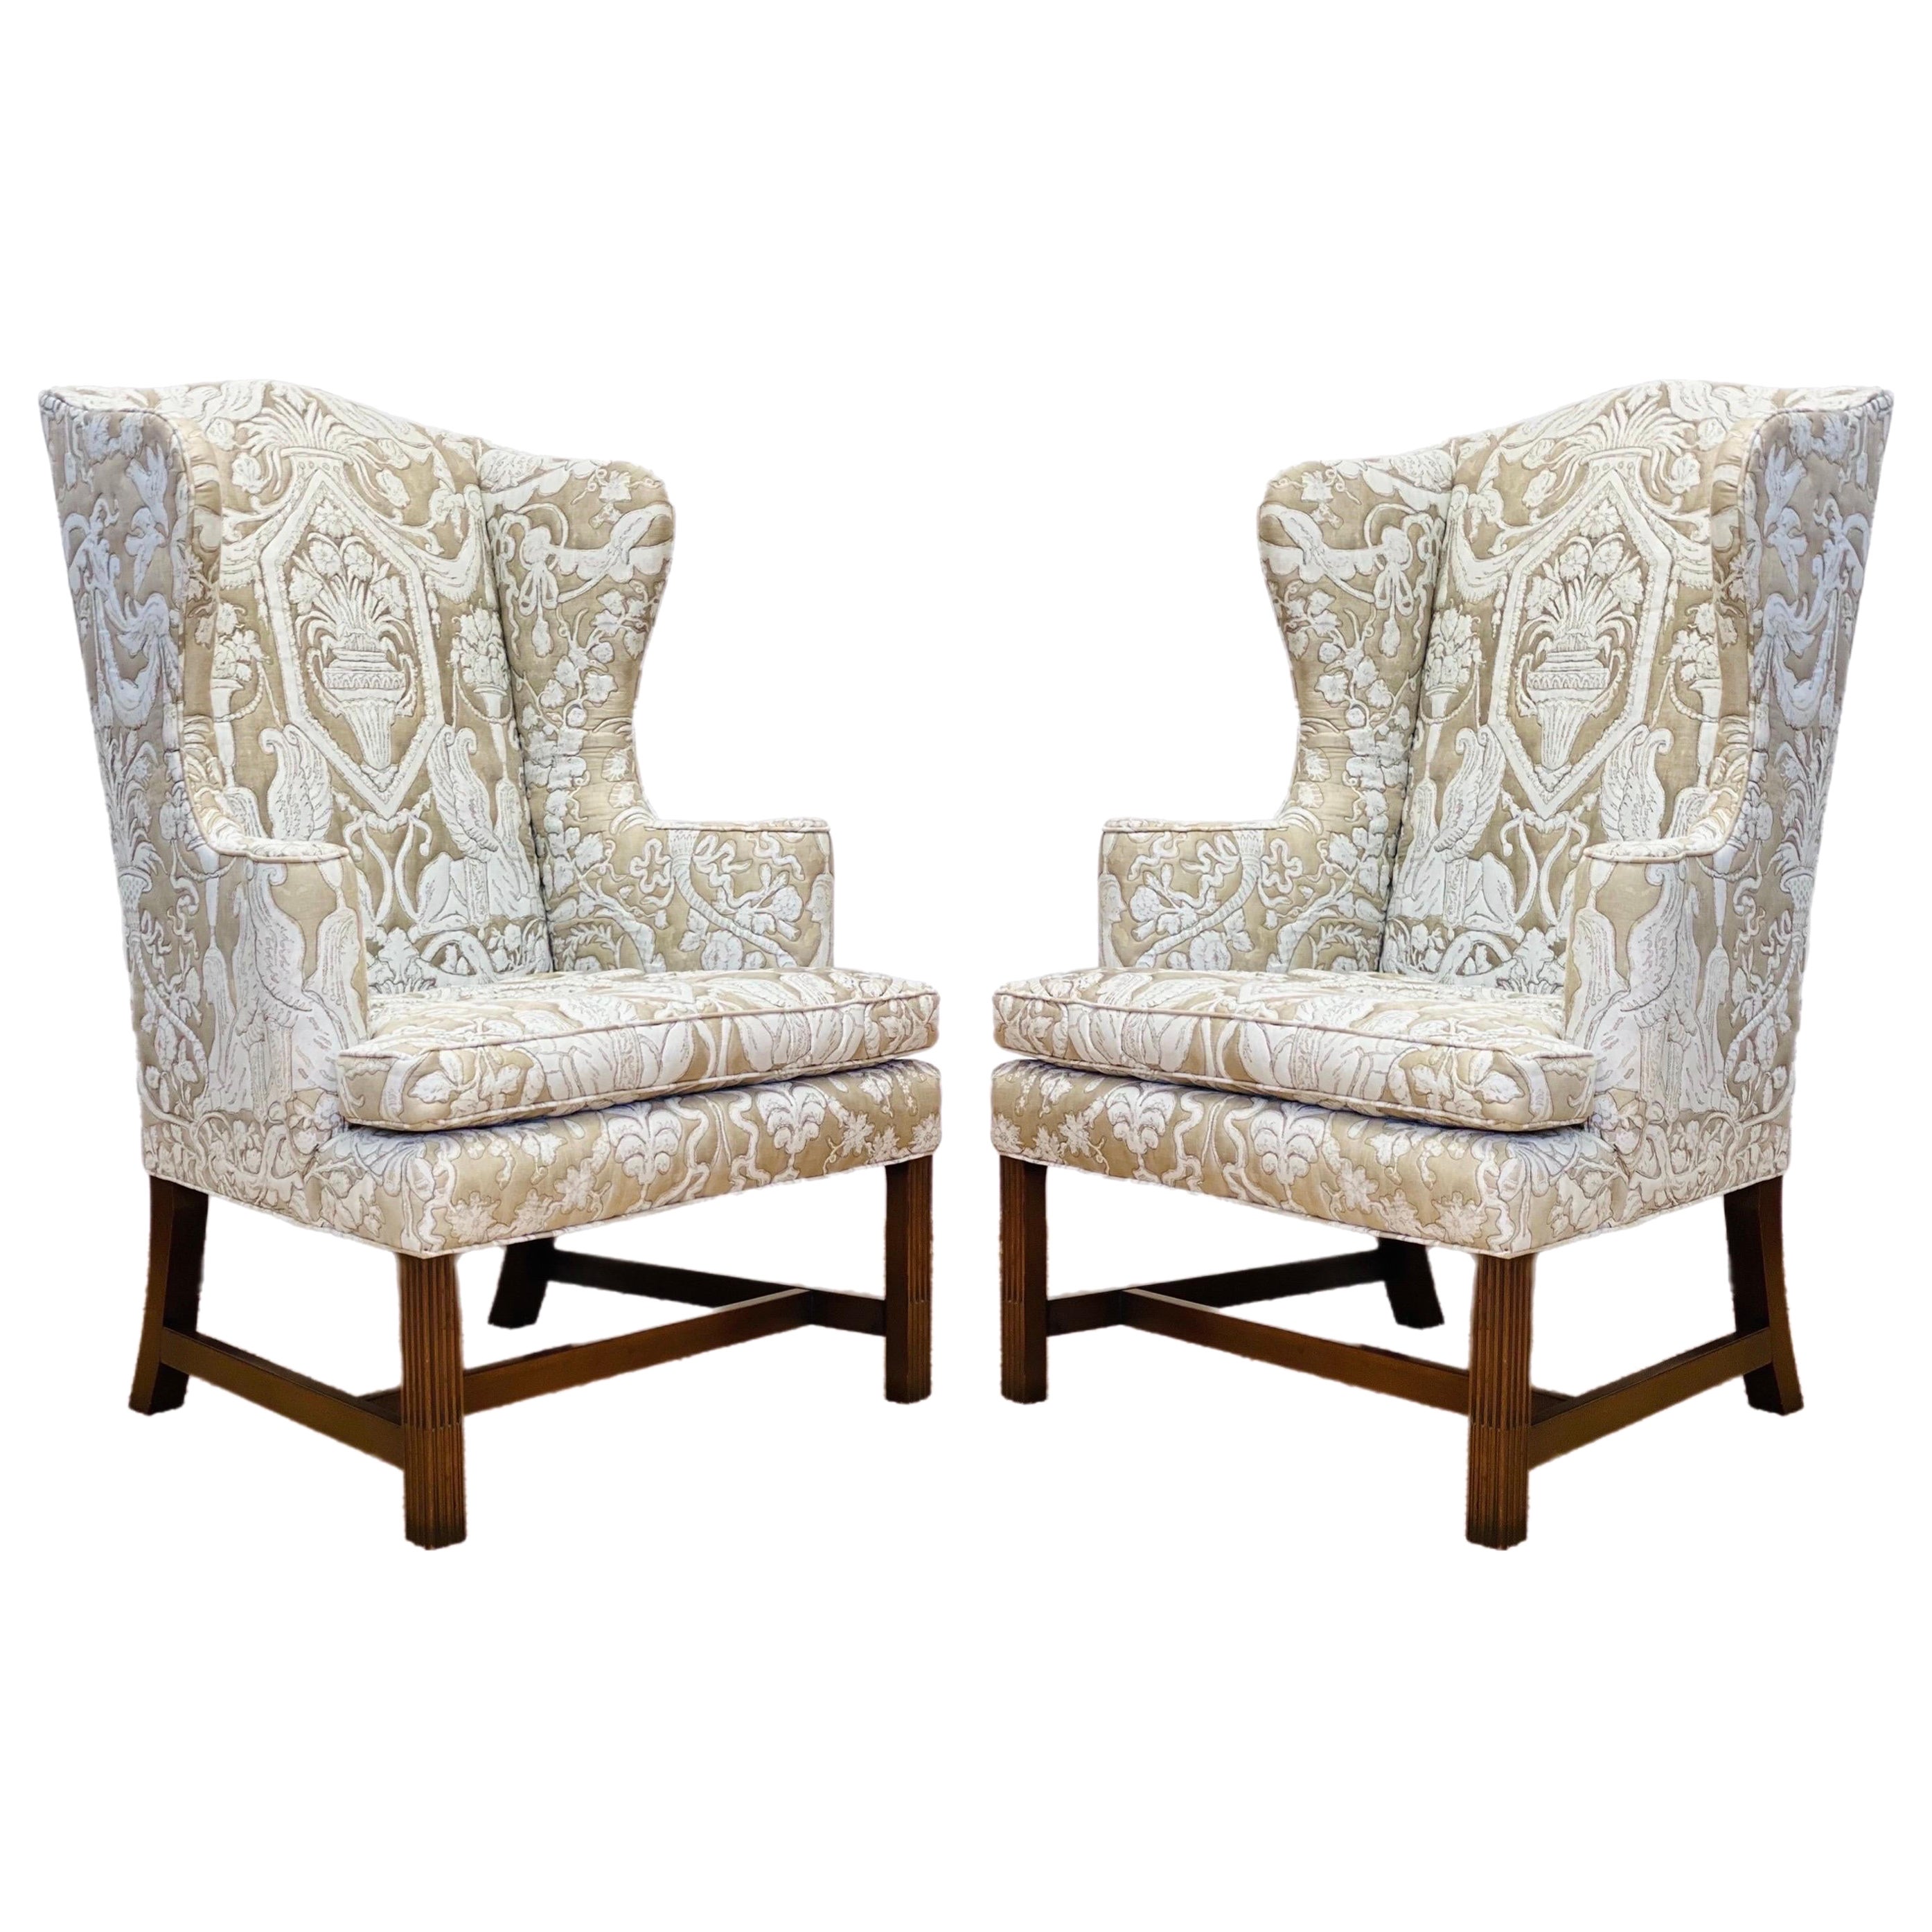 1960s Kittinger Cw12 Colonial Williamsburg Neoclassical Wingback Chairs – a Pair